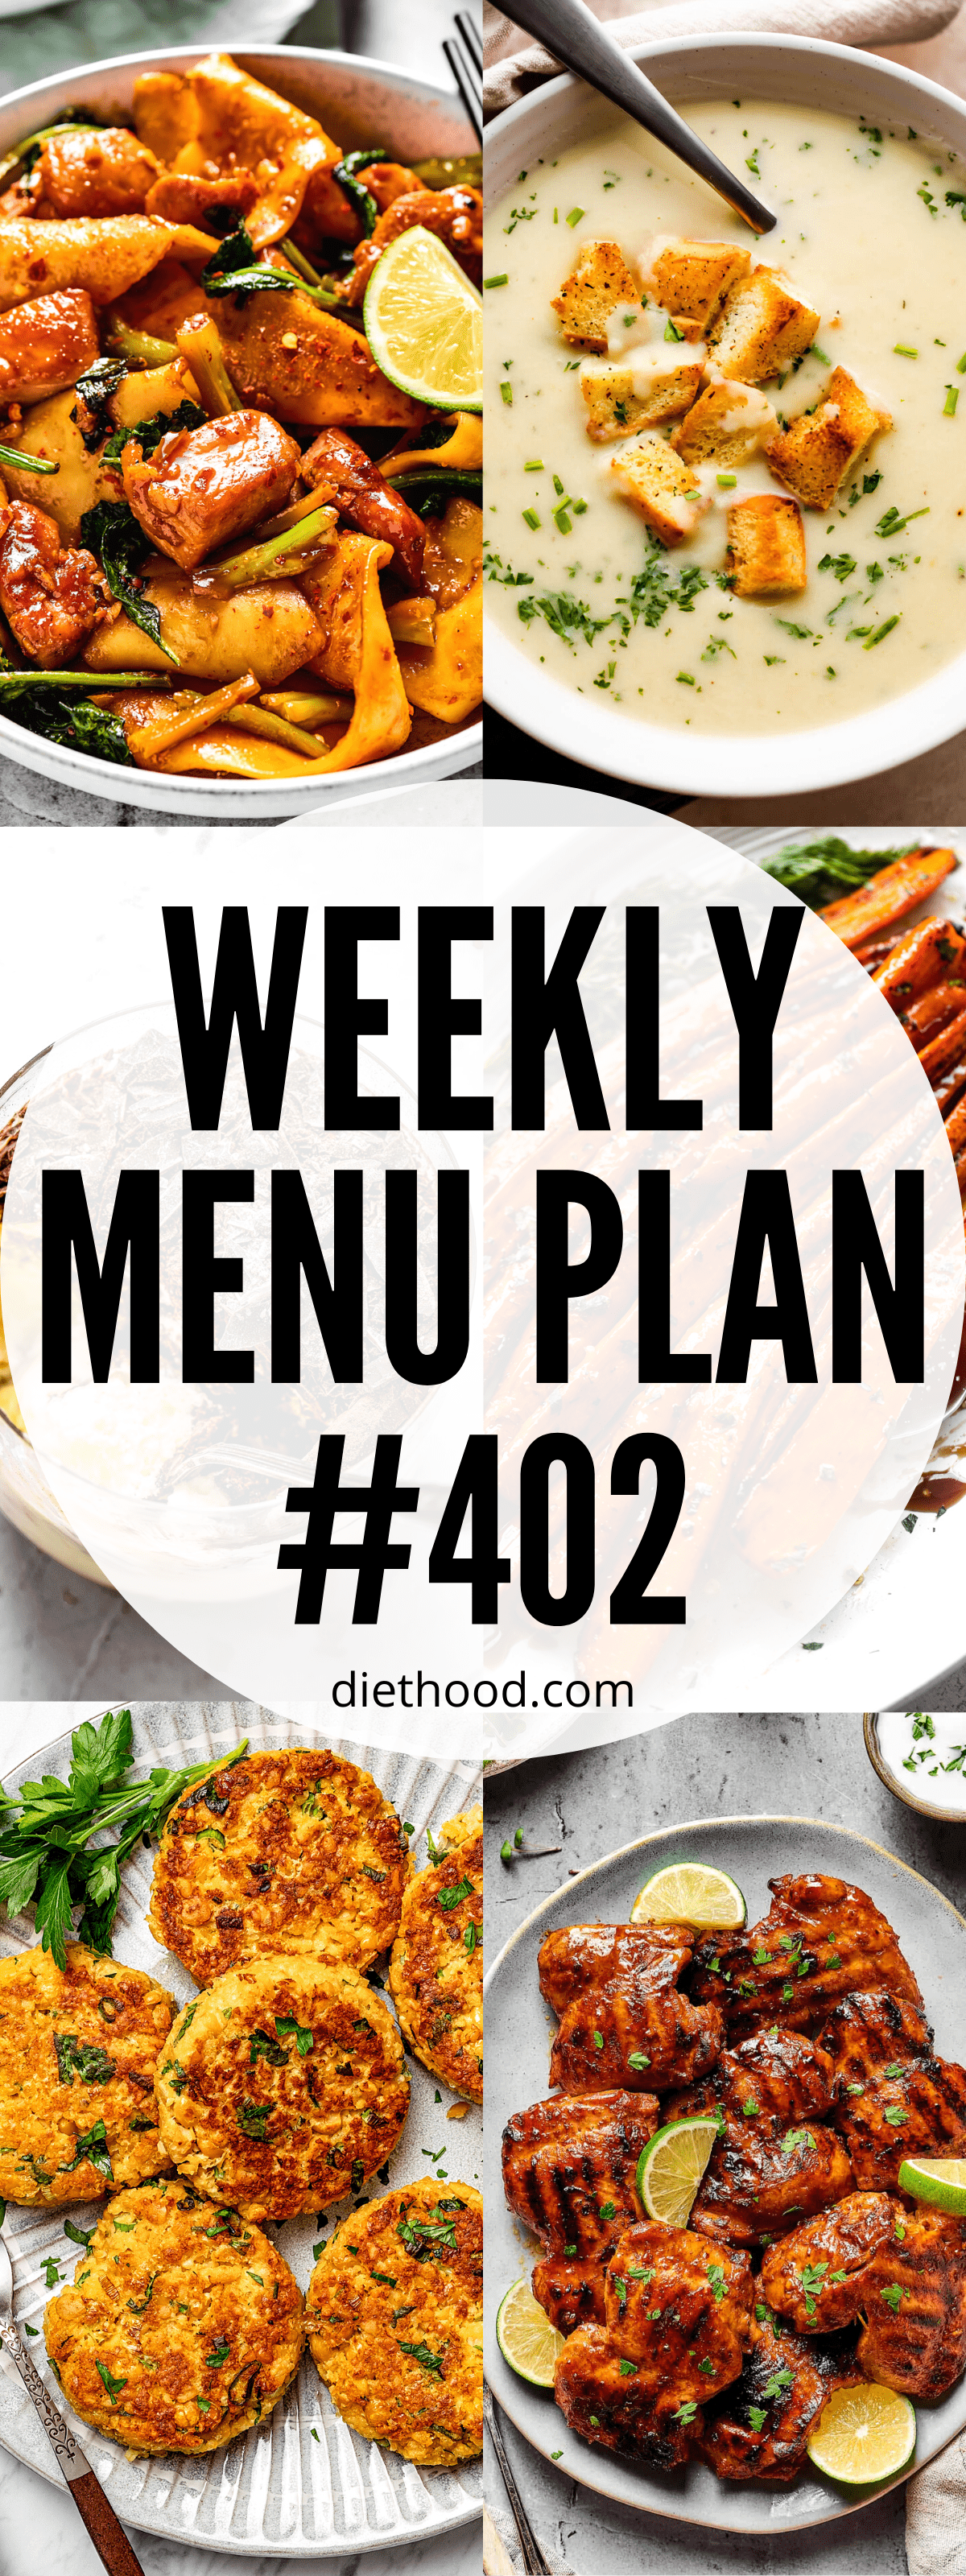 WEEKLY MENU PLAN (#402) six pictures collage